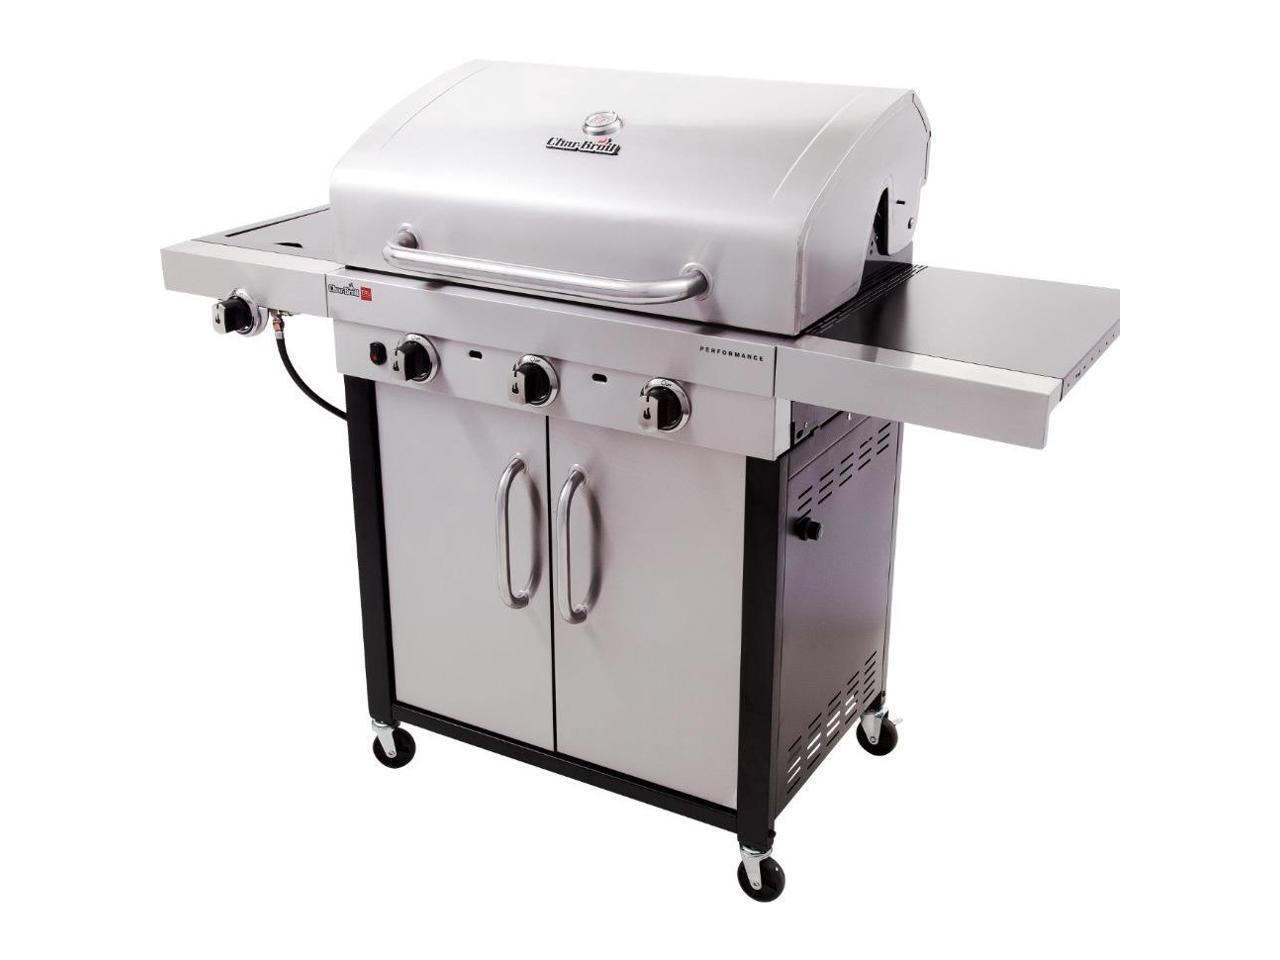 Char-Broil 463371719 Performance TRU-Infrared 3-Burner Cart Style Gas Grill Stainless Steel 